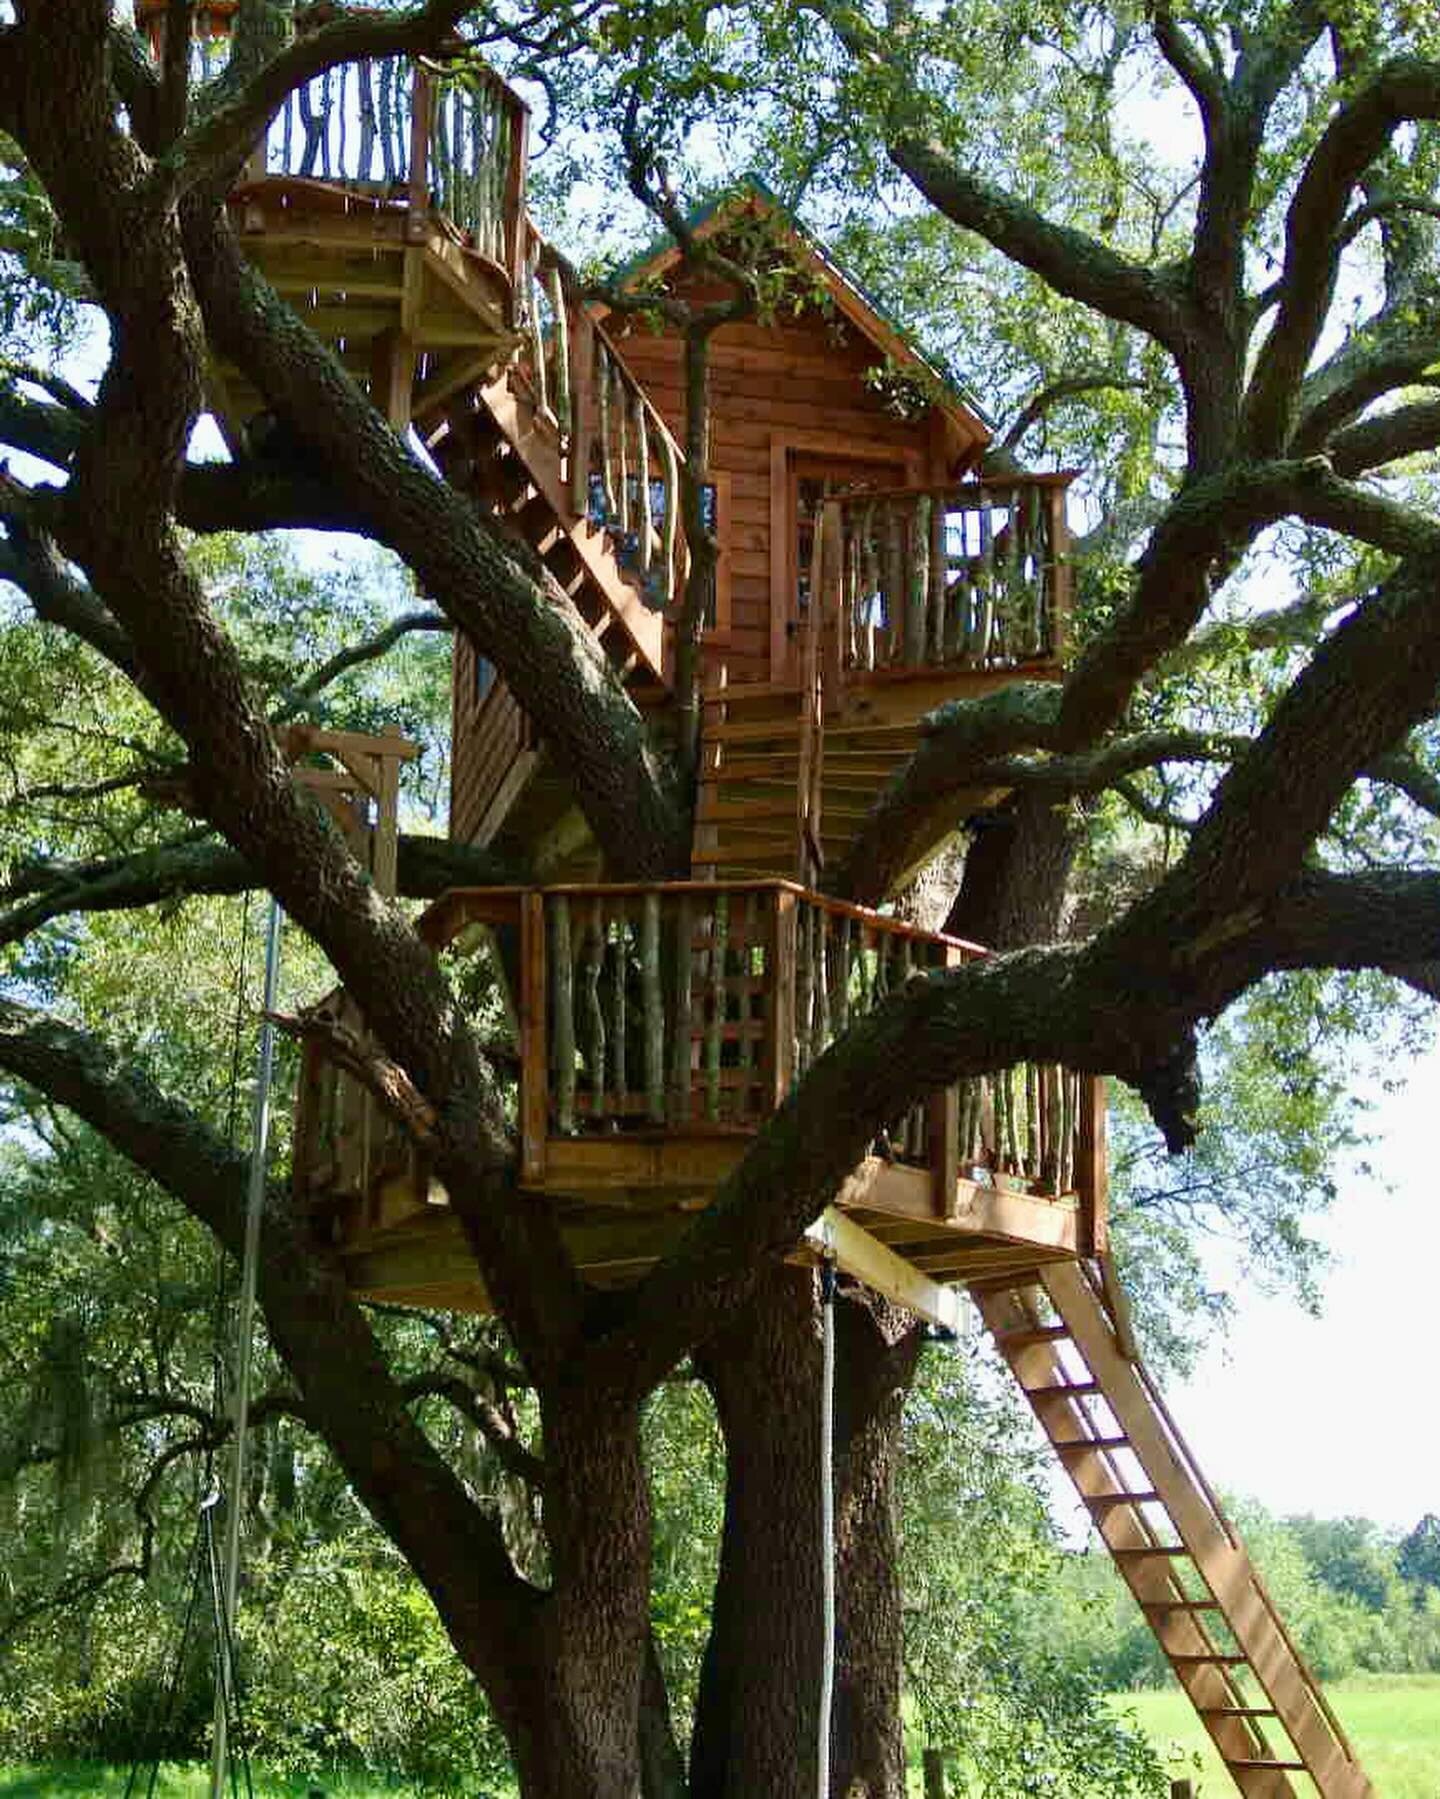 We often get request to make our treehouses seamlessly blend in with the trees. How did we do? 😊

#georgia #treehousemagic #magictree #treehouselover #worldtreehouses #treehouselife #treefort #kidstreehouse #treehousebuilder #treehouseexperts #treeh